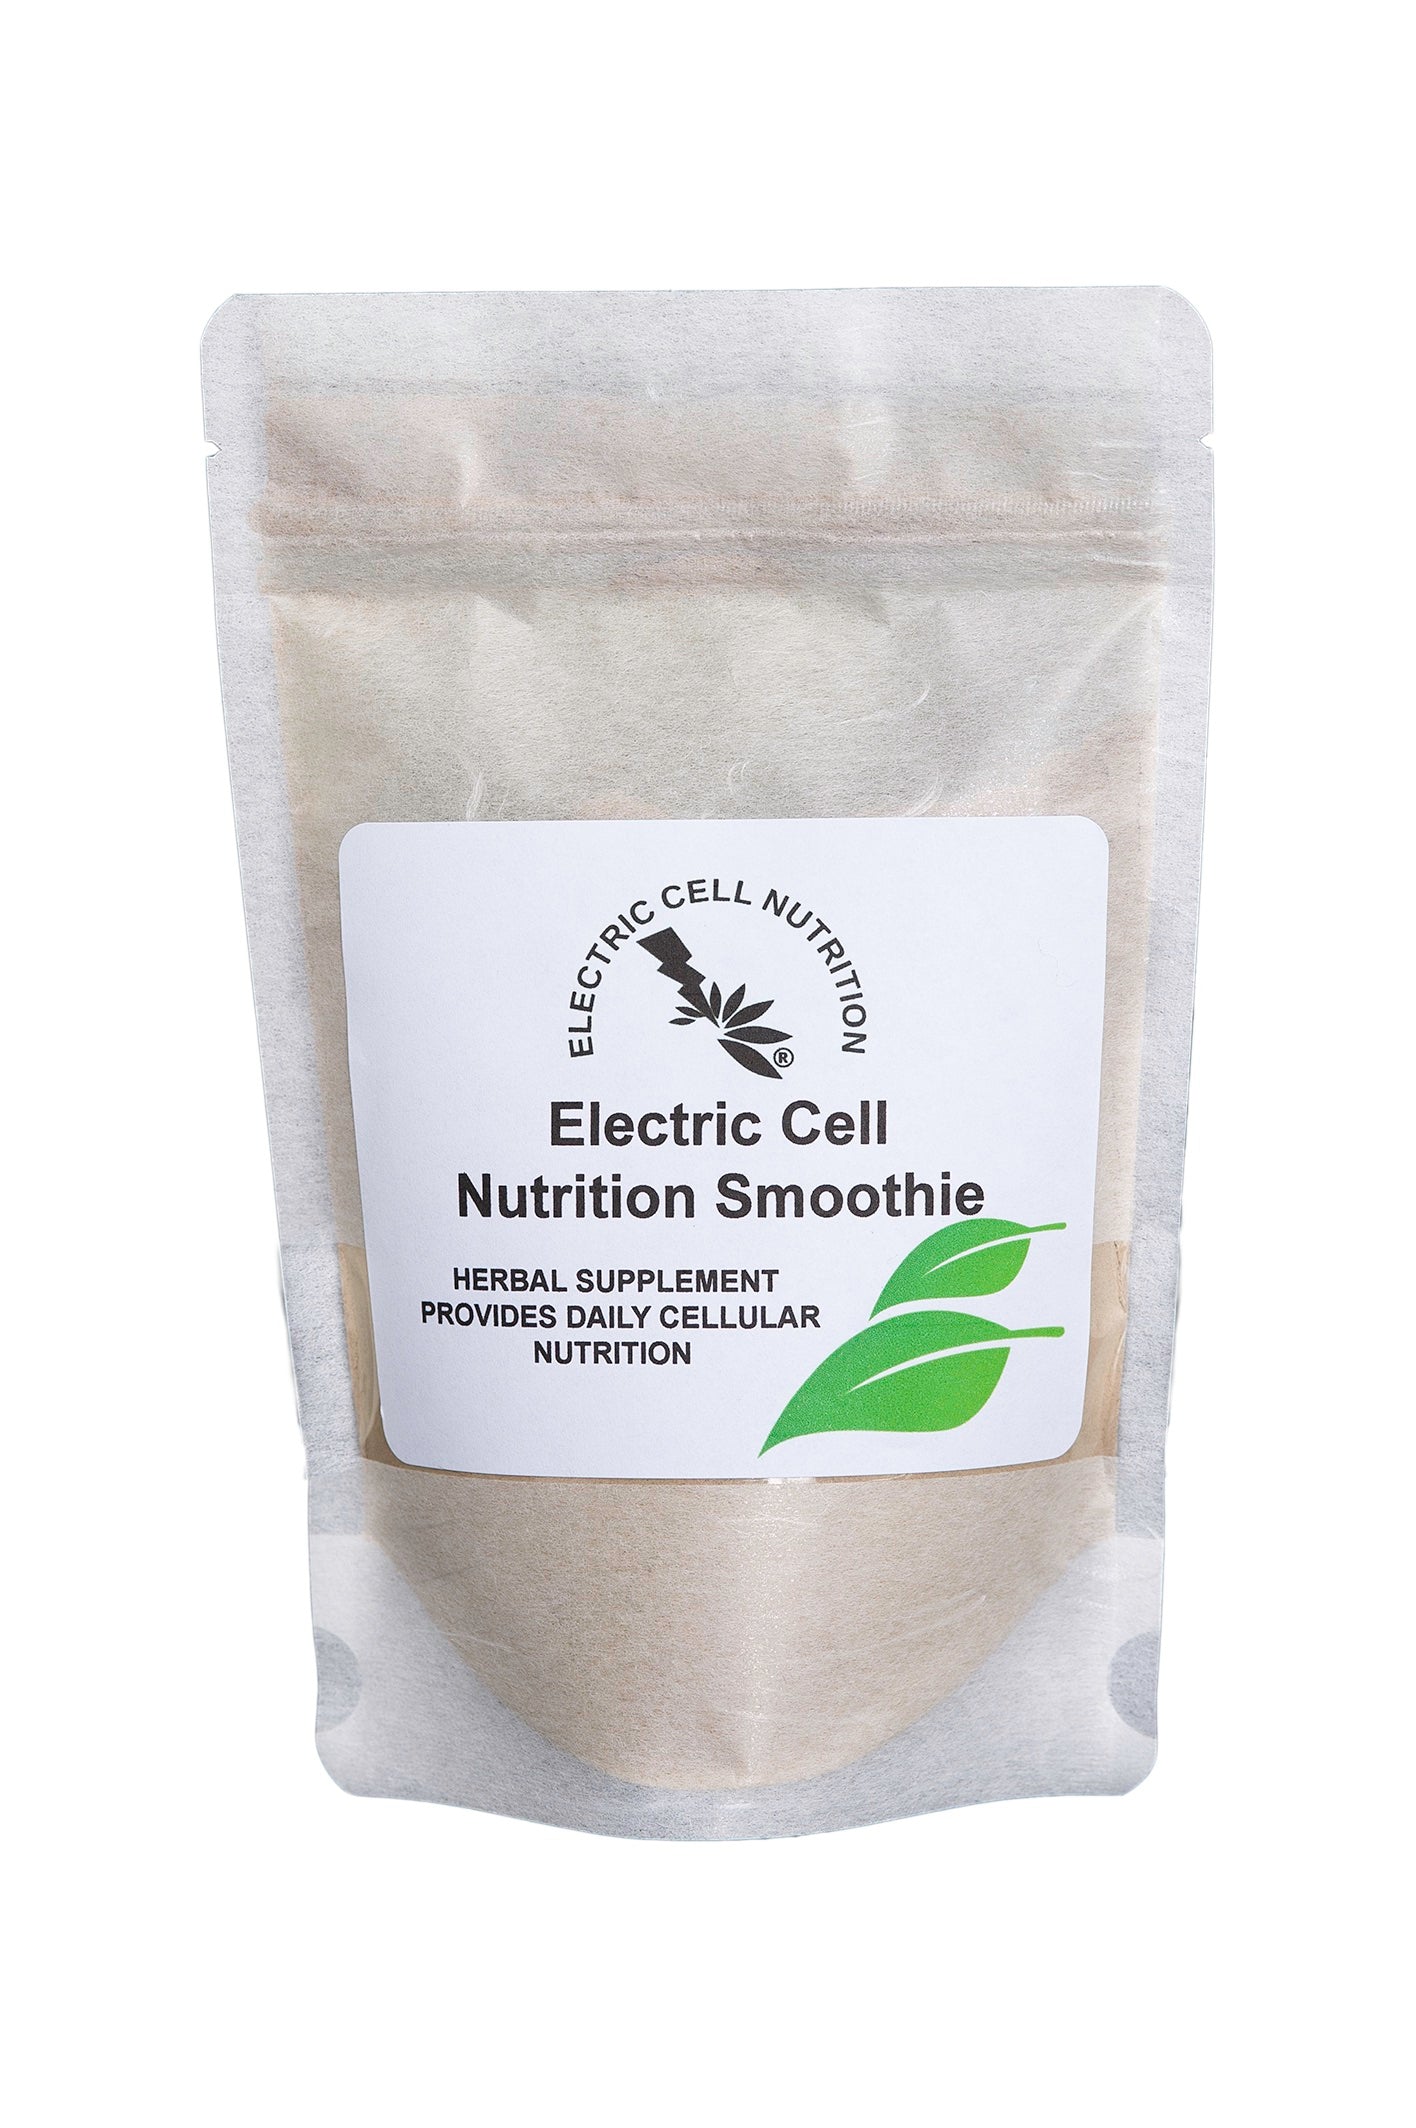 Electric Cell Nutrition Smoothie